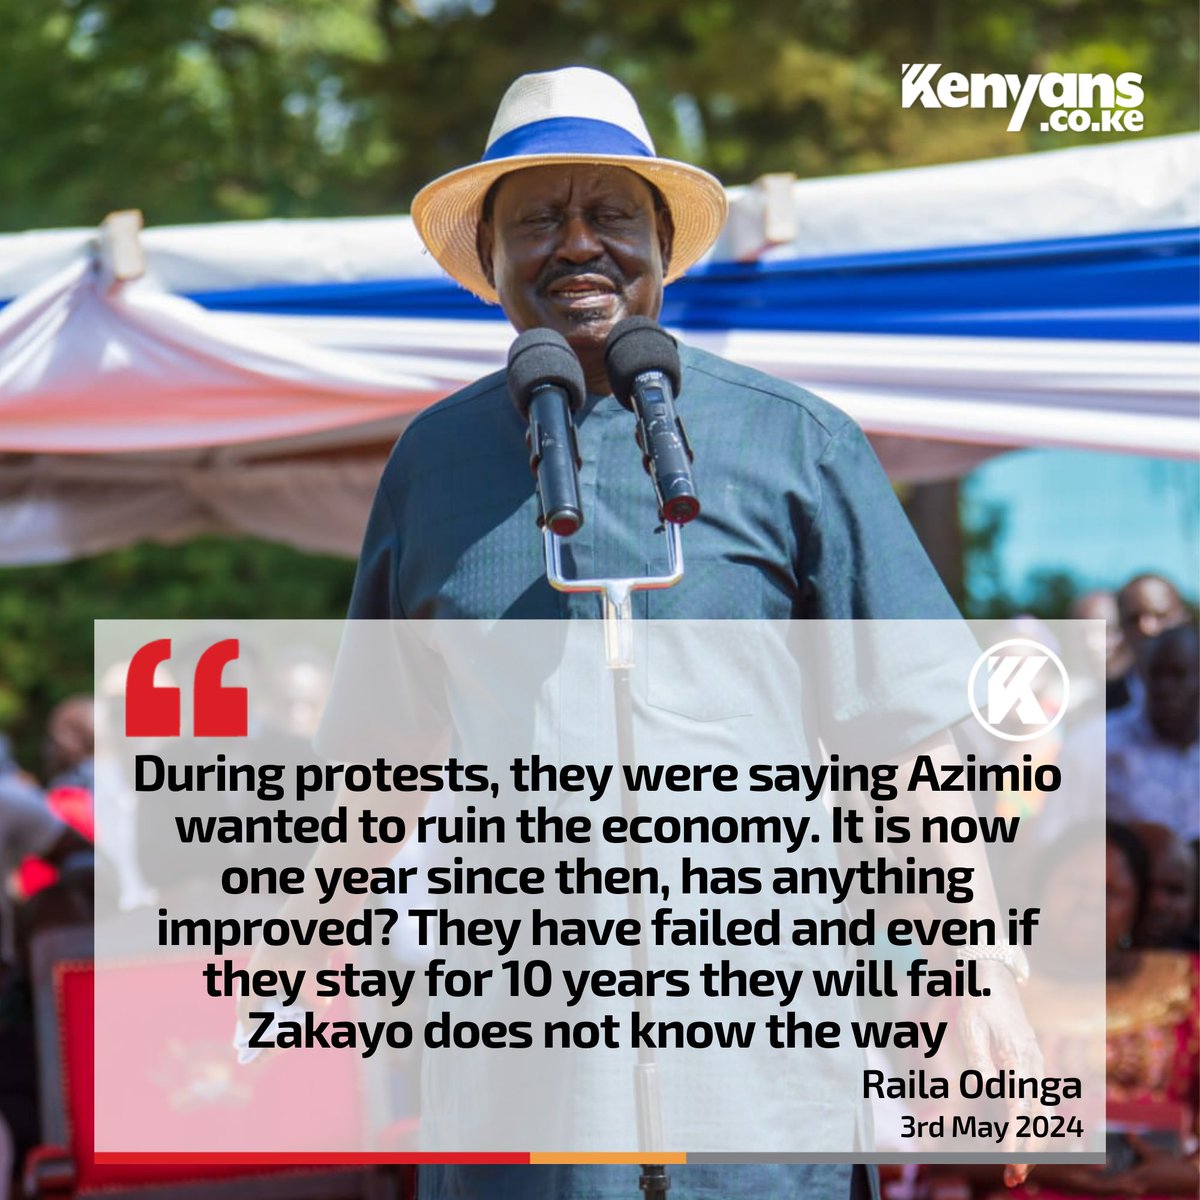 It is now one year since the protests, has anything improved? - Raila Odinga